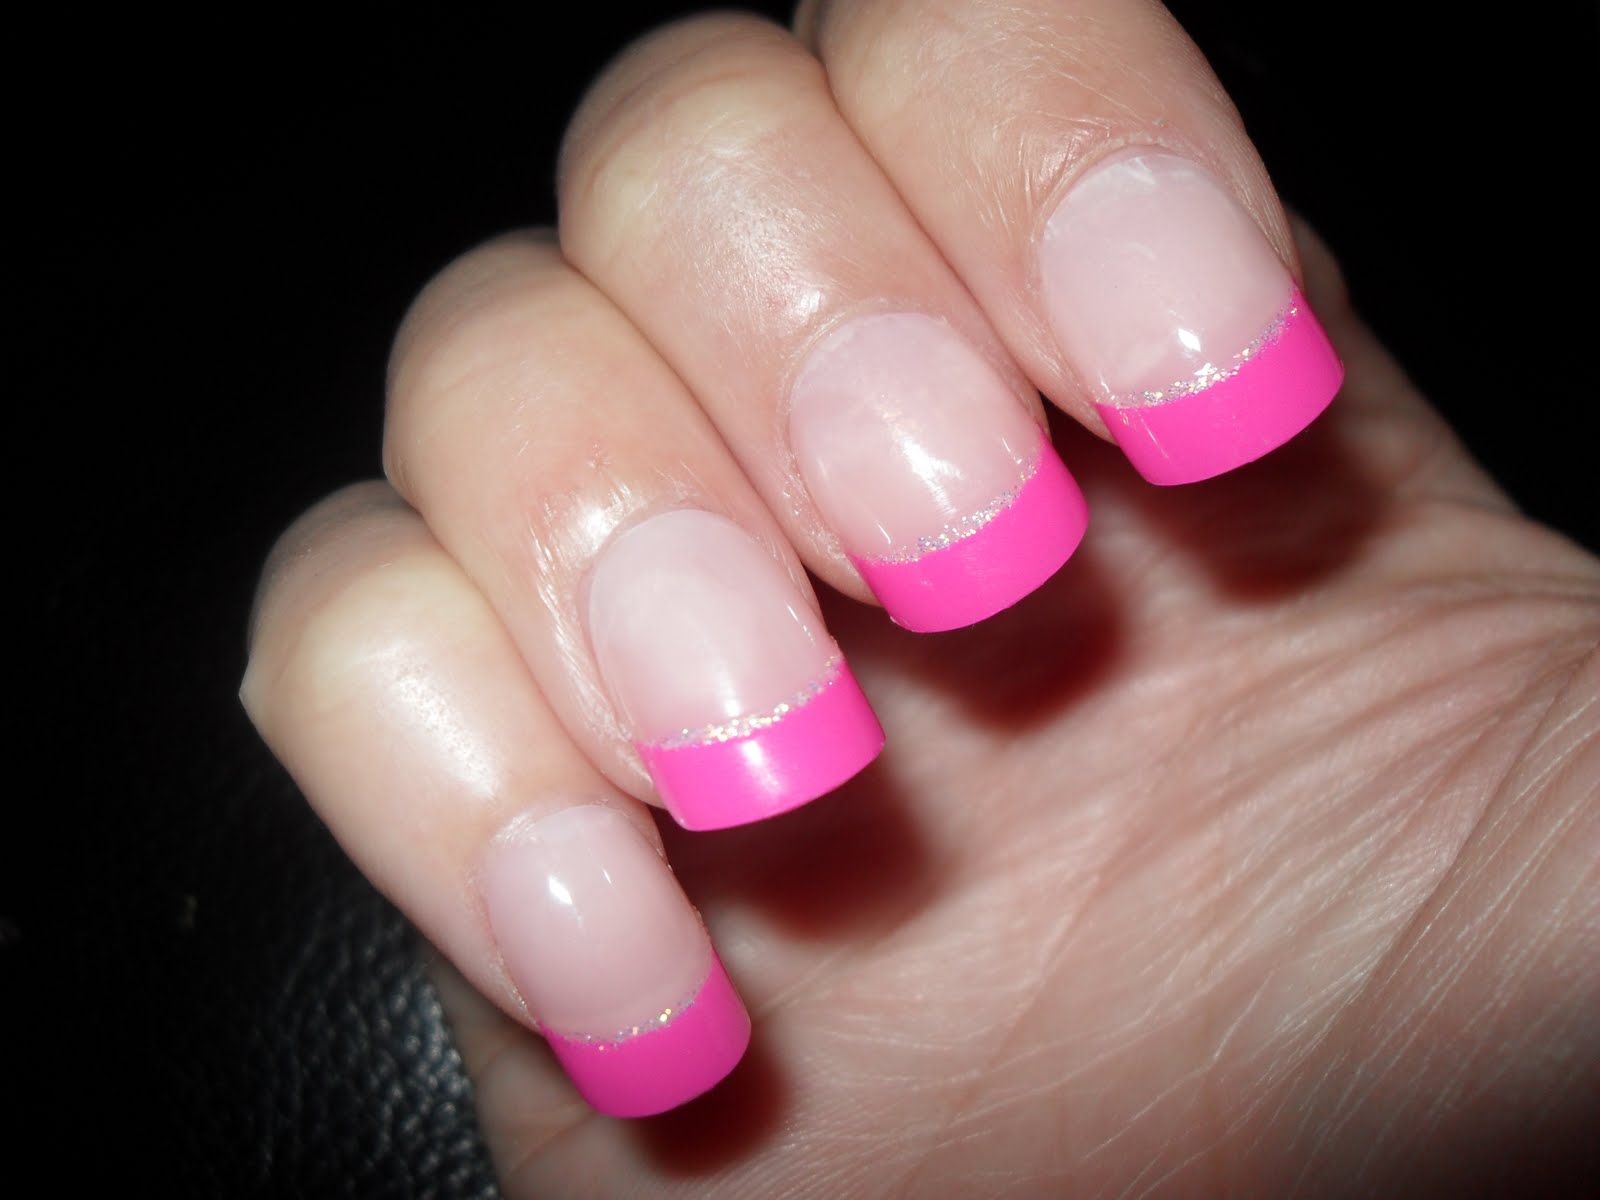 3. "Geometric French Manicure with Metallic Accents" - wide 3